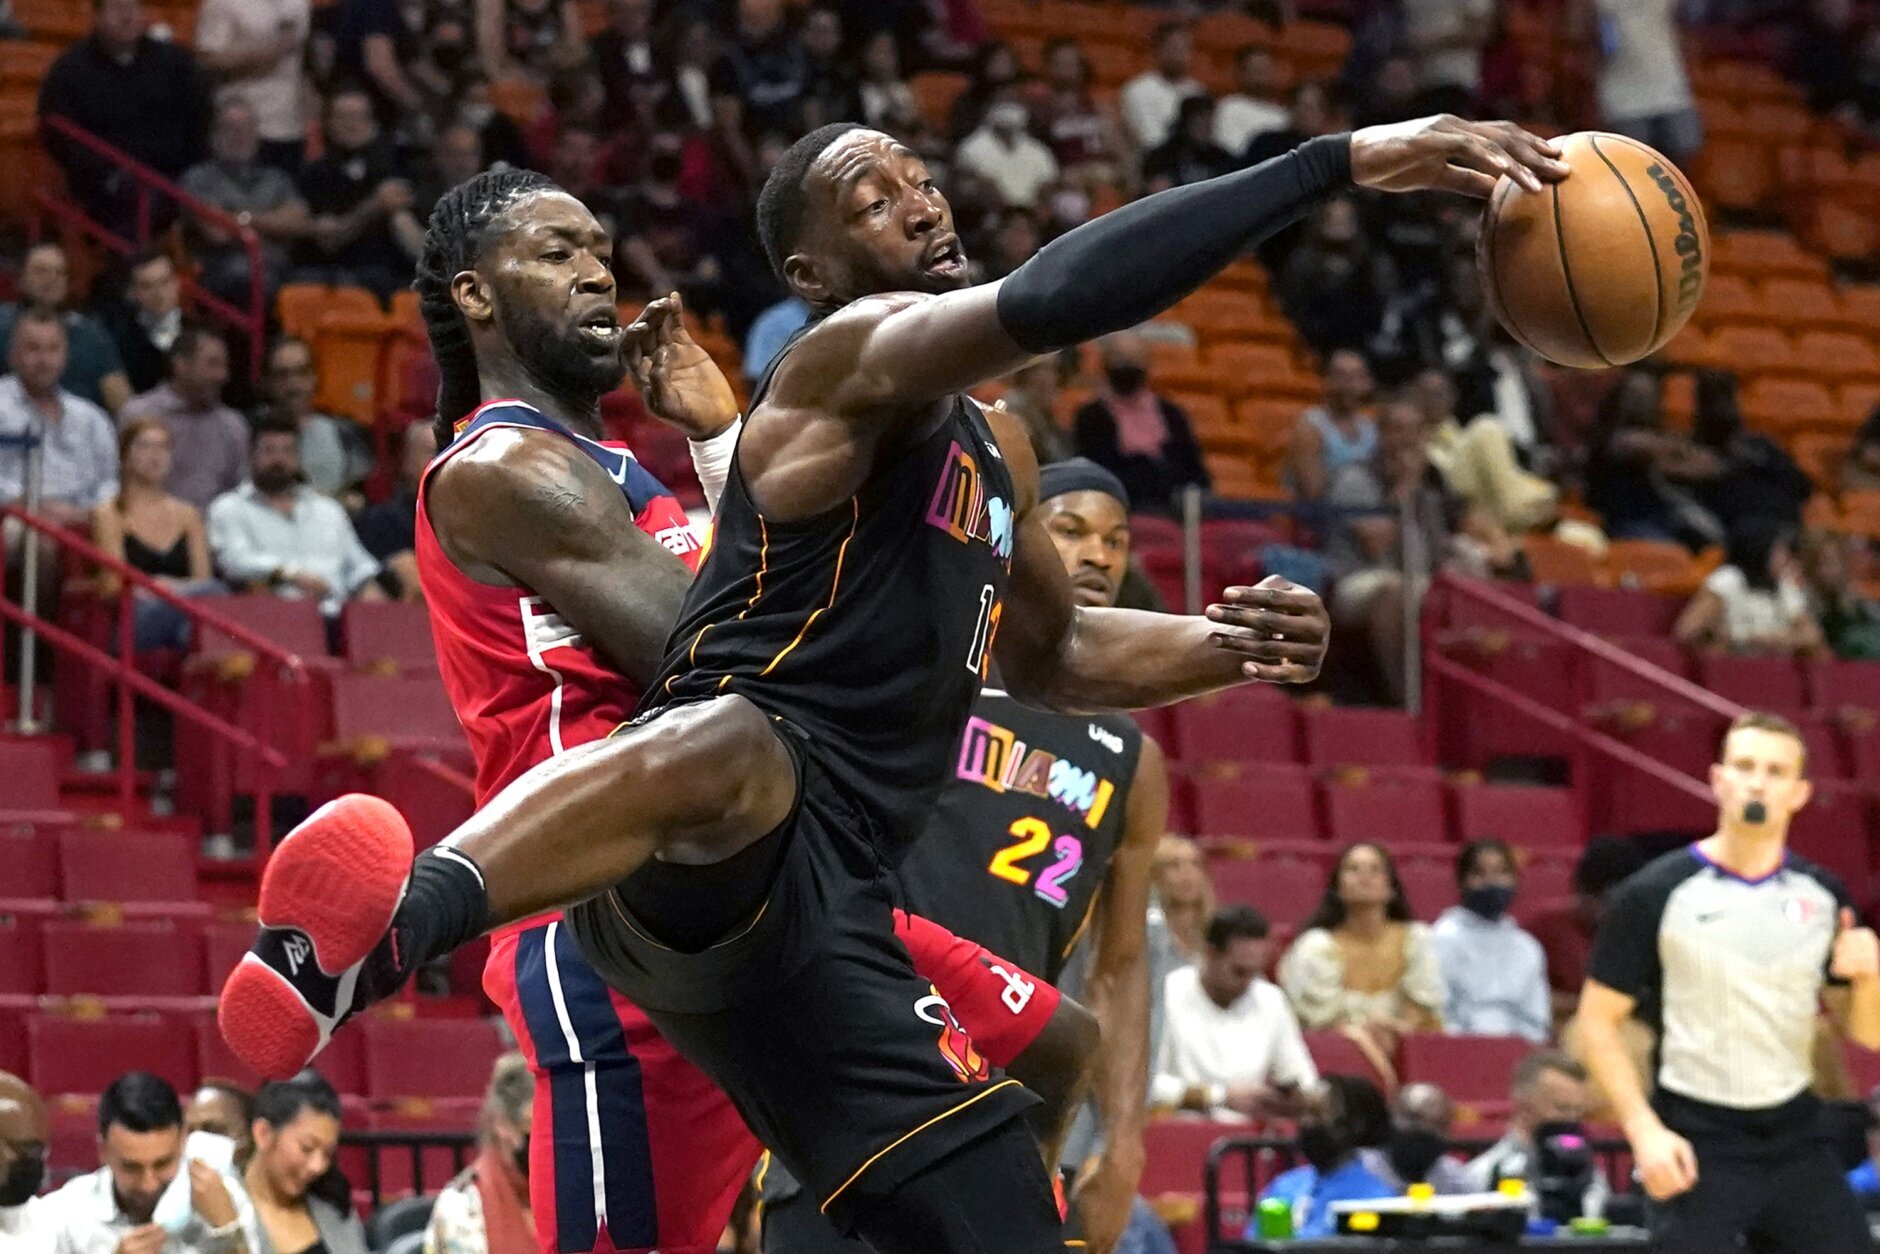 Butler has 32 points, Heat beat Wizards to open 2-game set | WTOP News